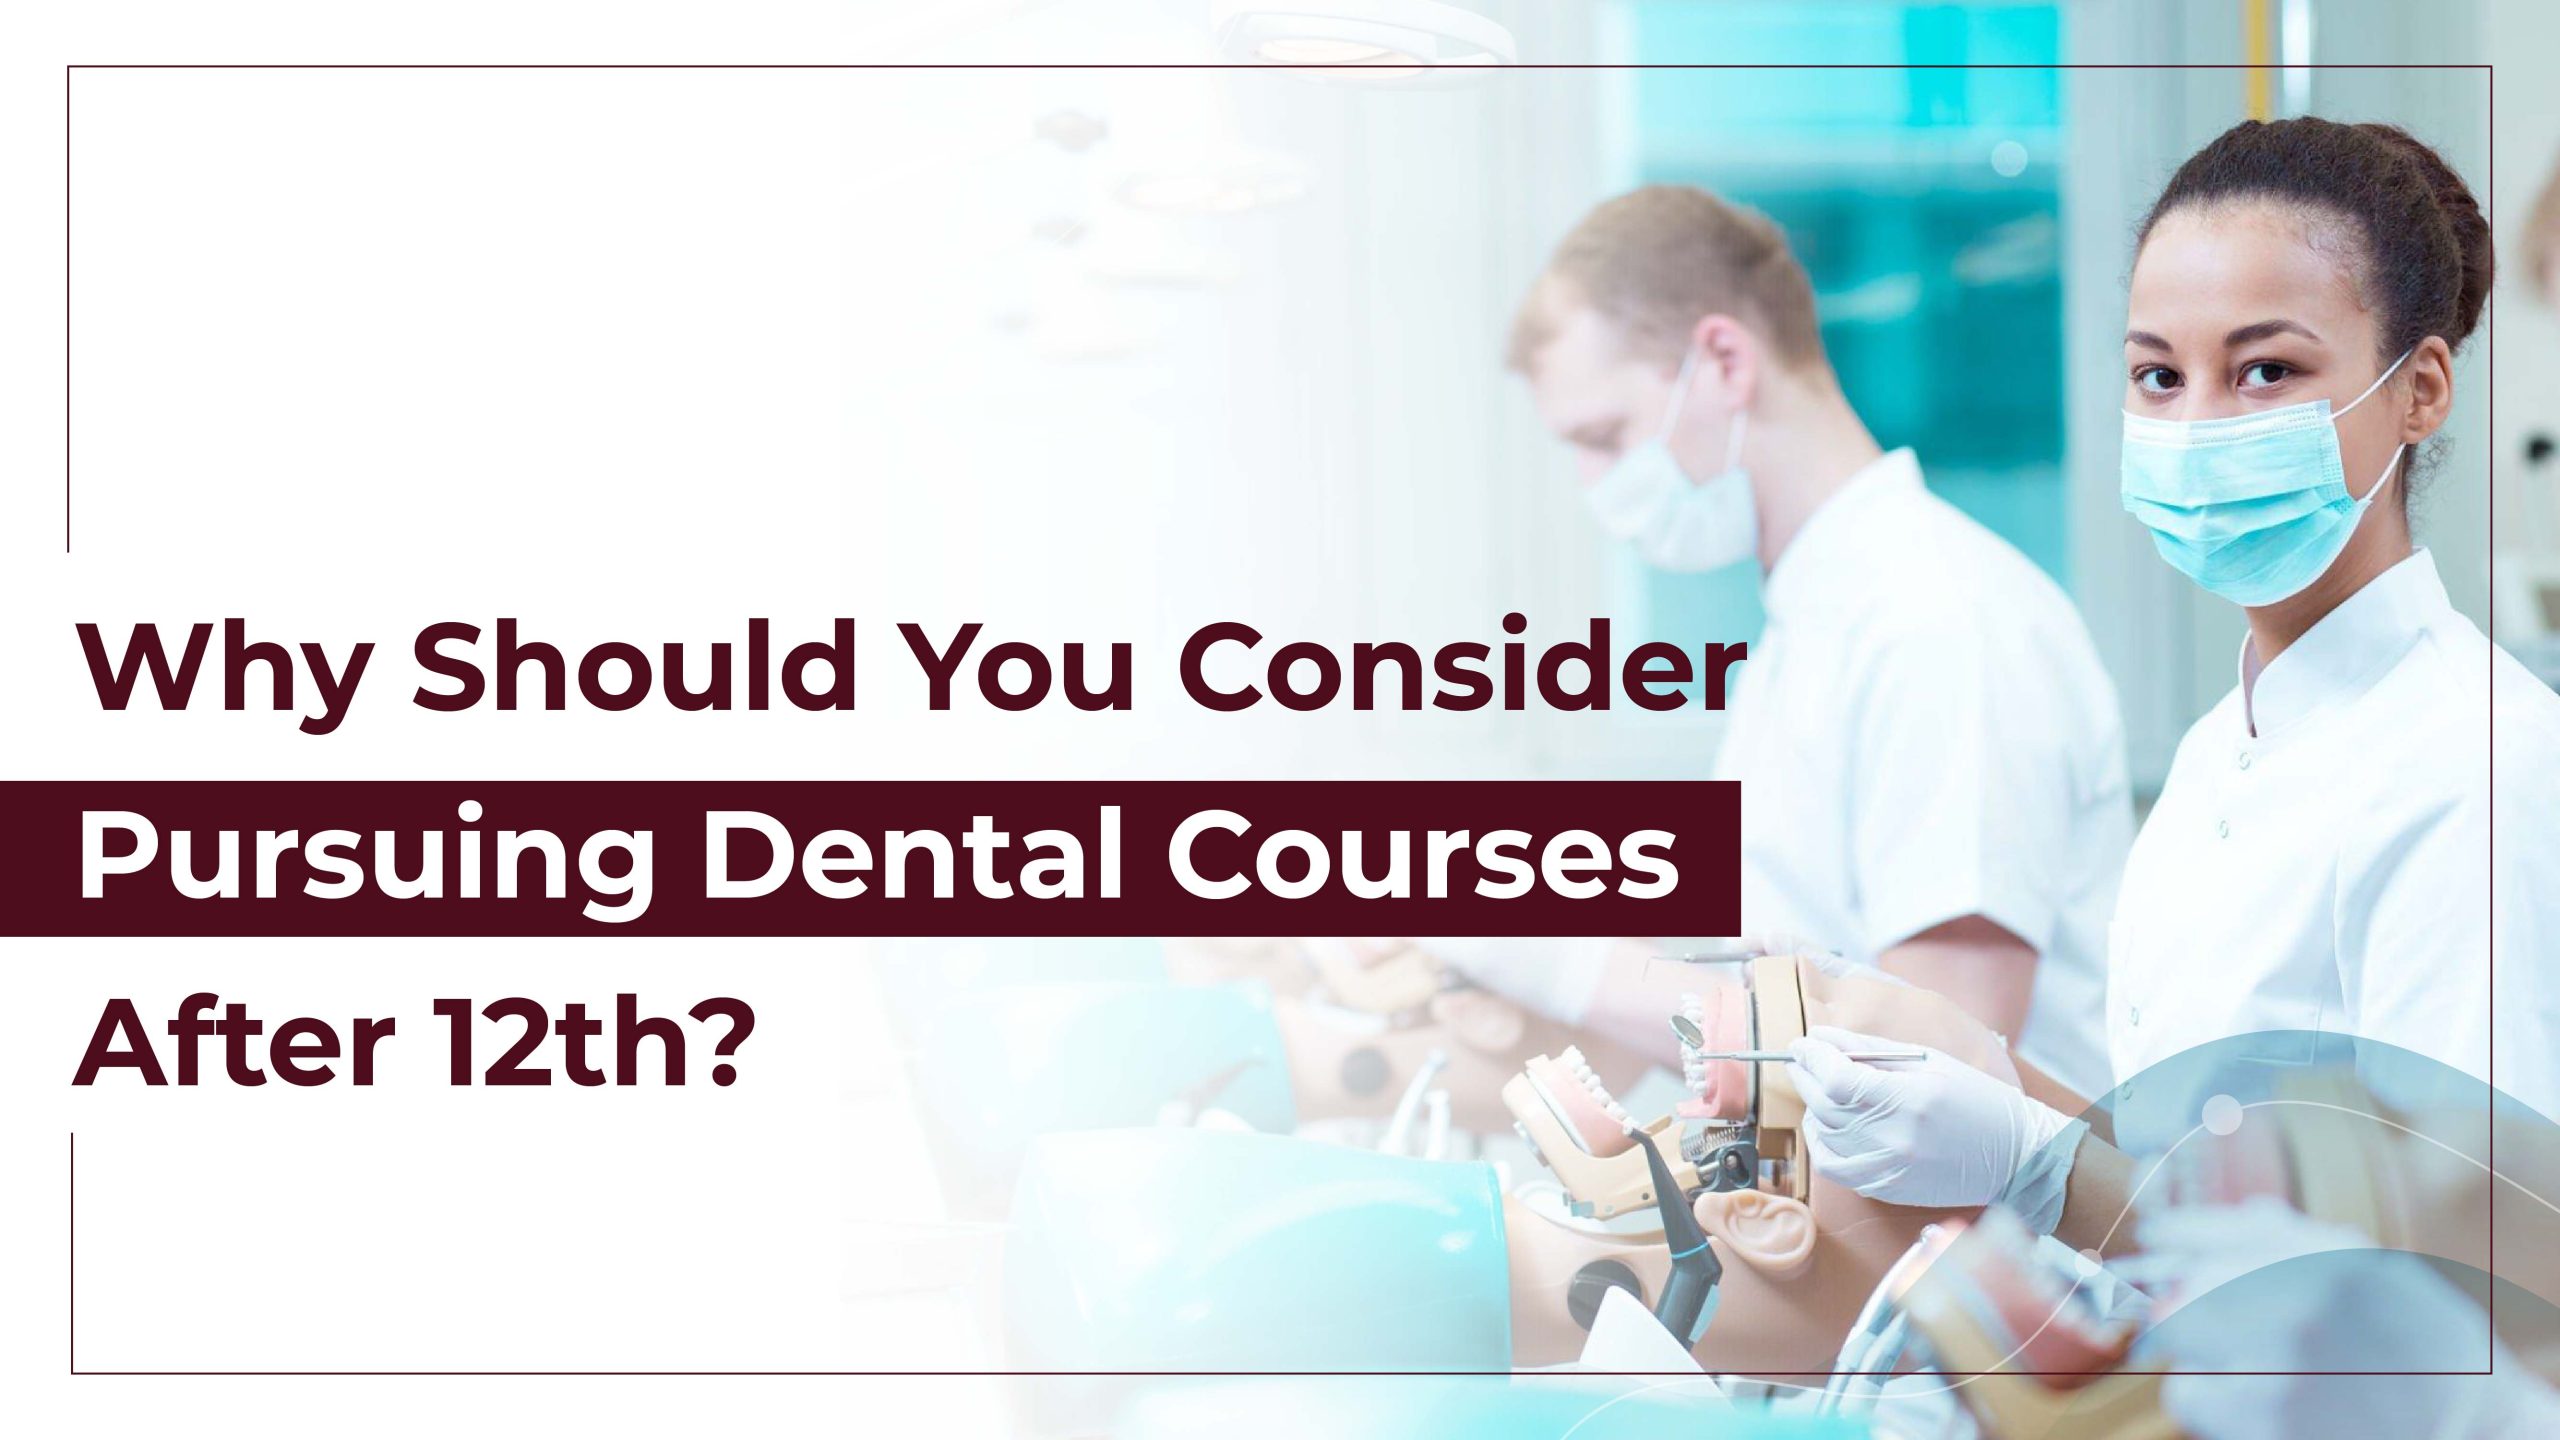 Why Should You Consider Pursuing Dental Courses After 12th?